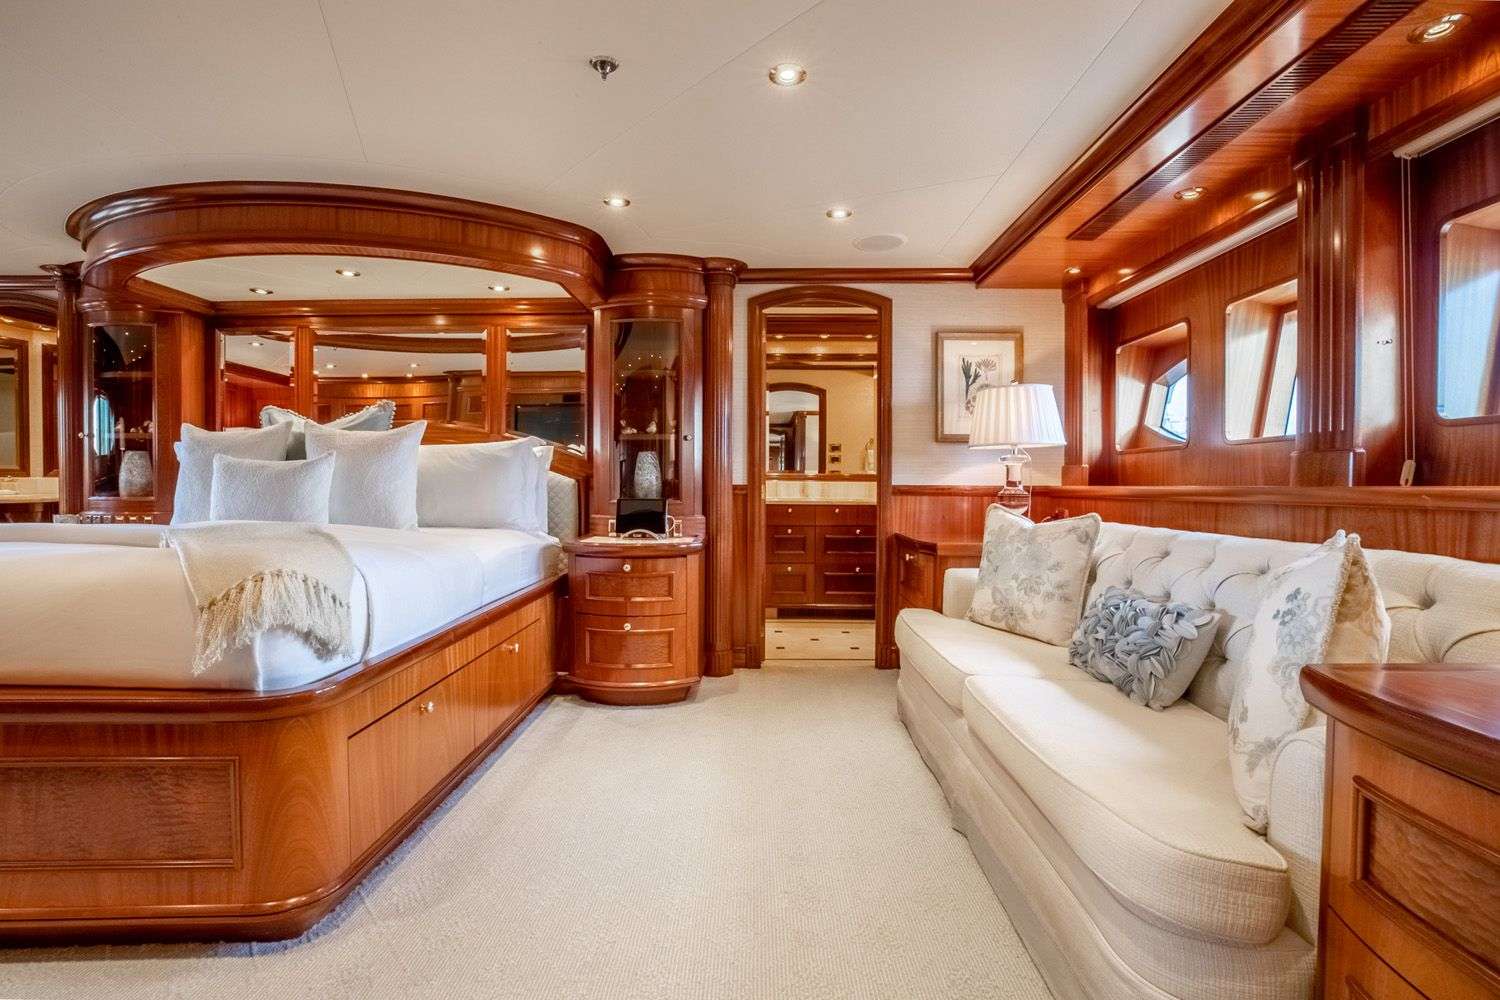 Motor Yacht 'MISS STEPHANIE' Owner's Stateroom, 10 PAX, 8 Crew, 138.00 Ft, 42.00 Meters, Built 2004, Richmond Yachts, Refit Year 2018